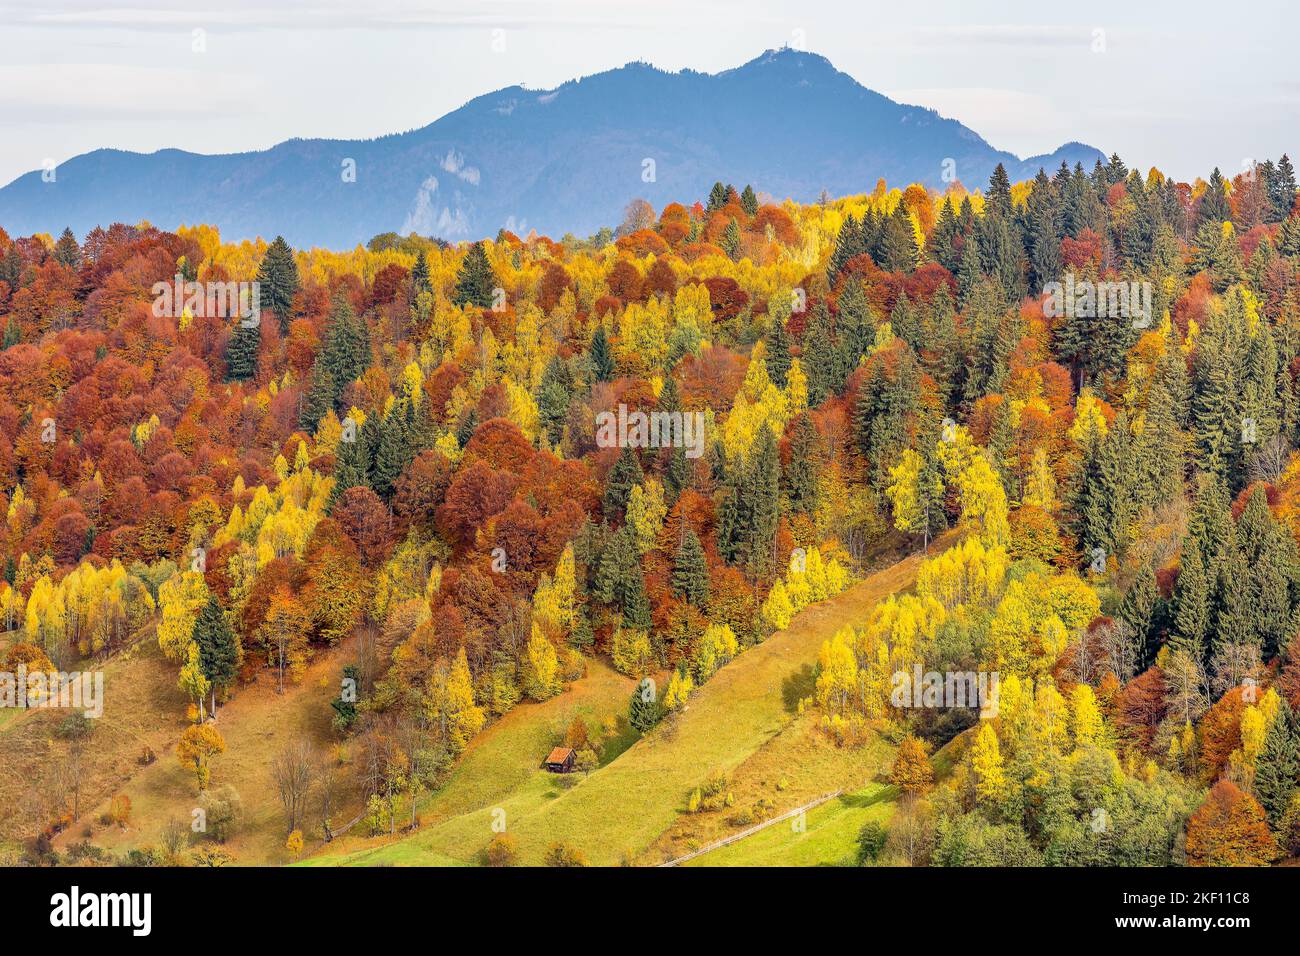 Scenic view of autumn colored forest at mountain in the Transylvanian Alps in Romania Stock Photo